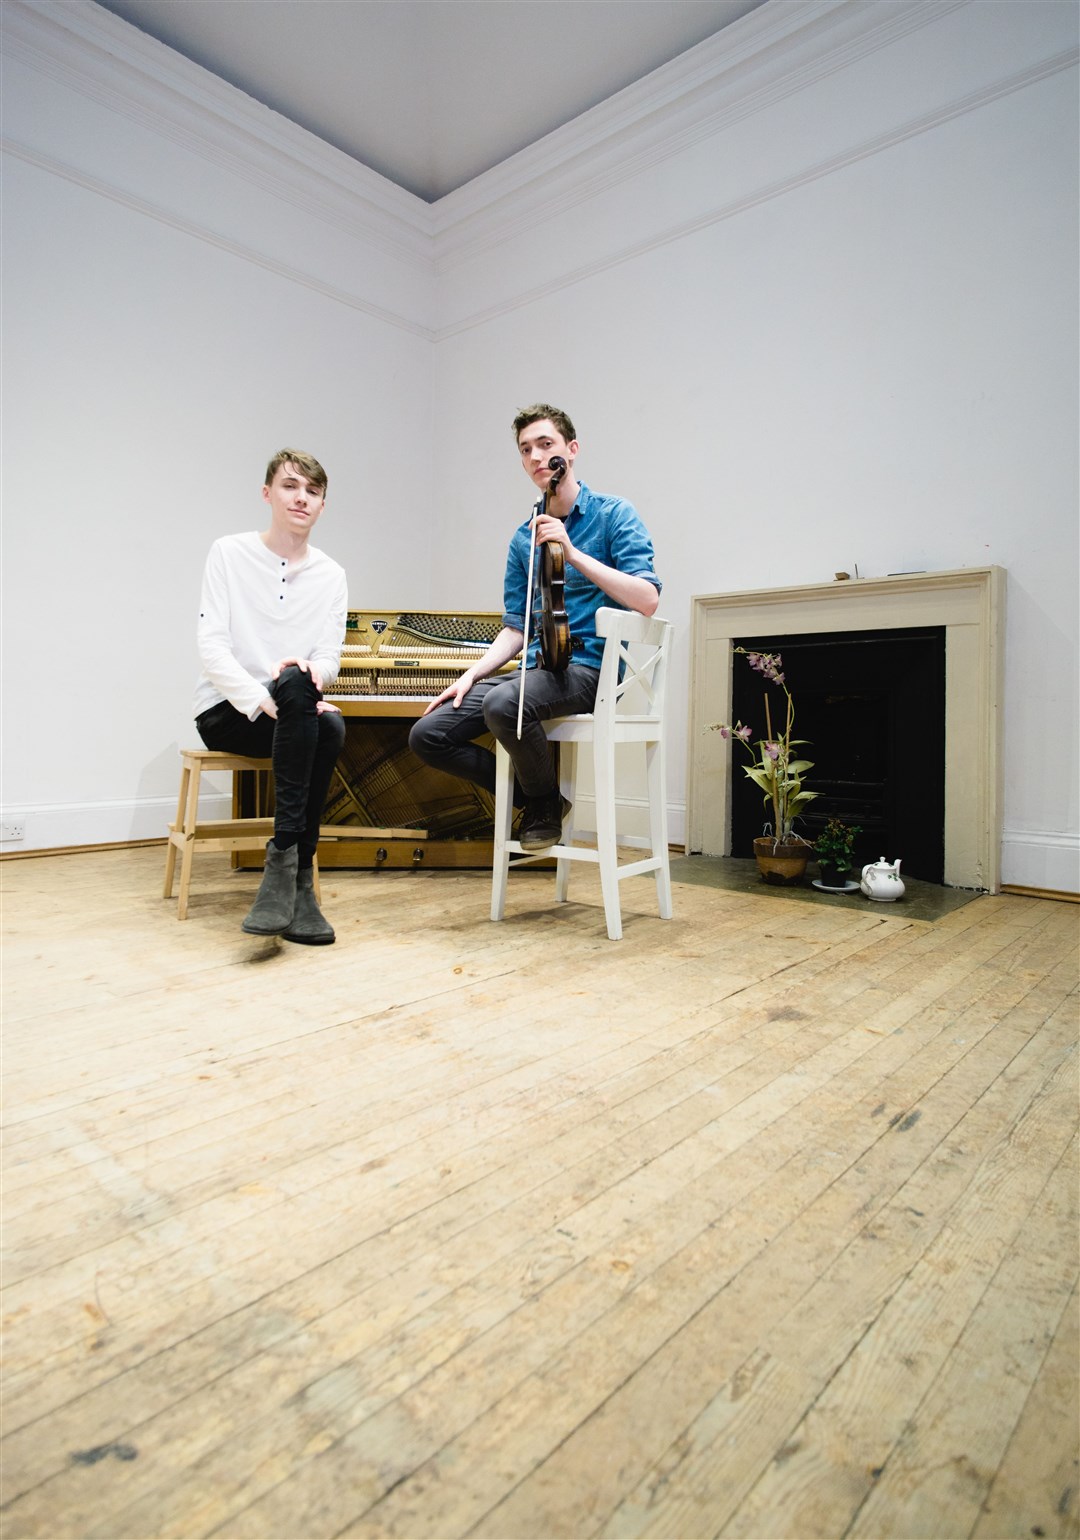 Joseph Peach (left) and Charlie Grey will debut tunes. Picture: Somhairle MacDonald